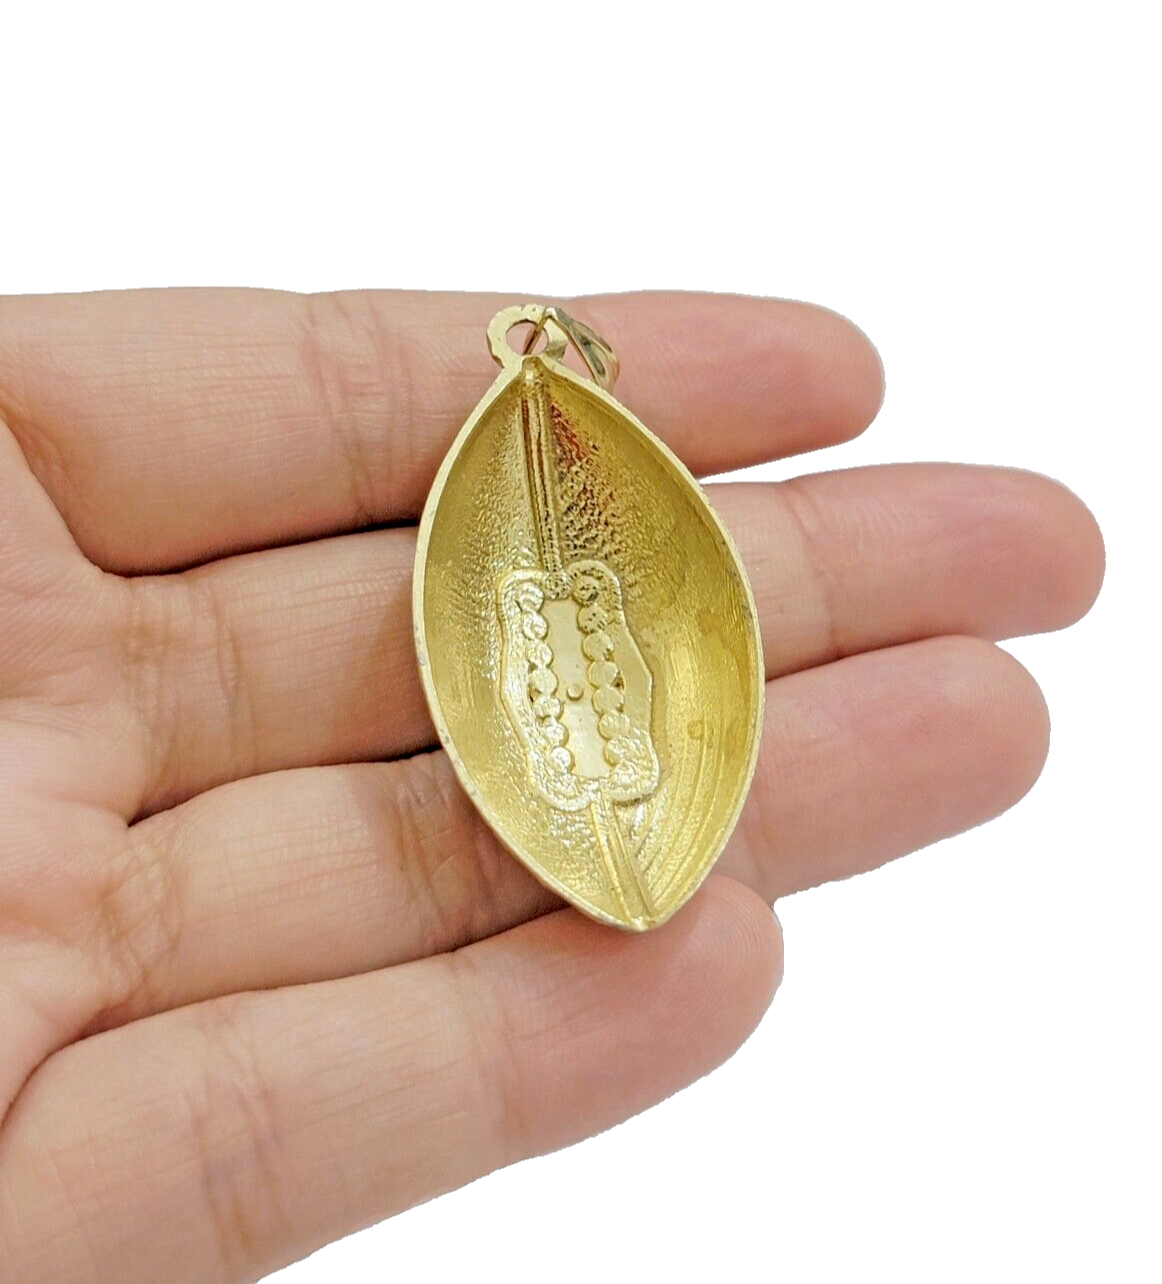 10k Yellow Gold Charm Pendant American Football Men's REAL 10KT , FREE SHIPPING